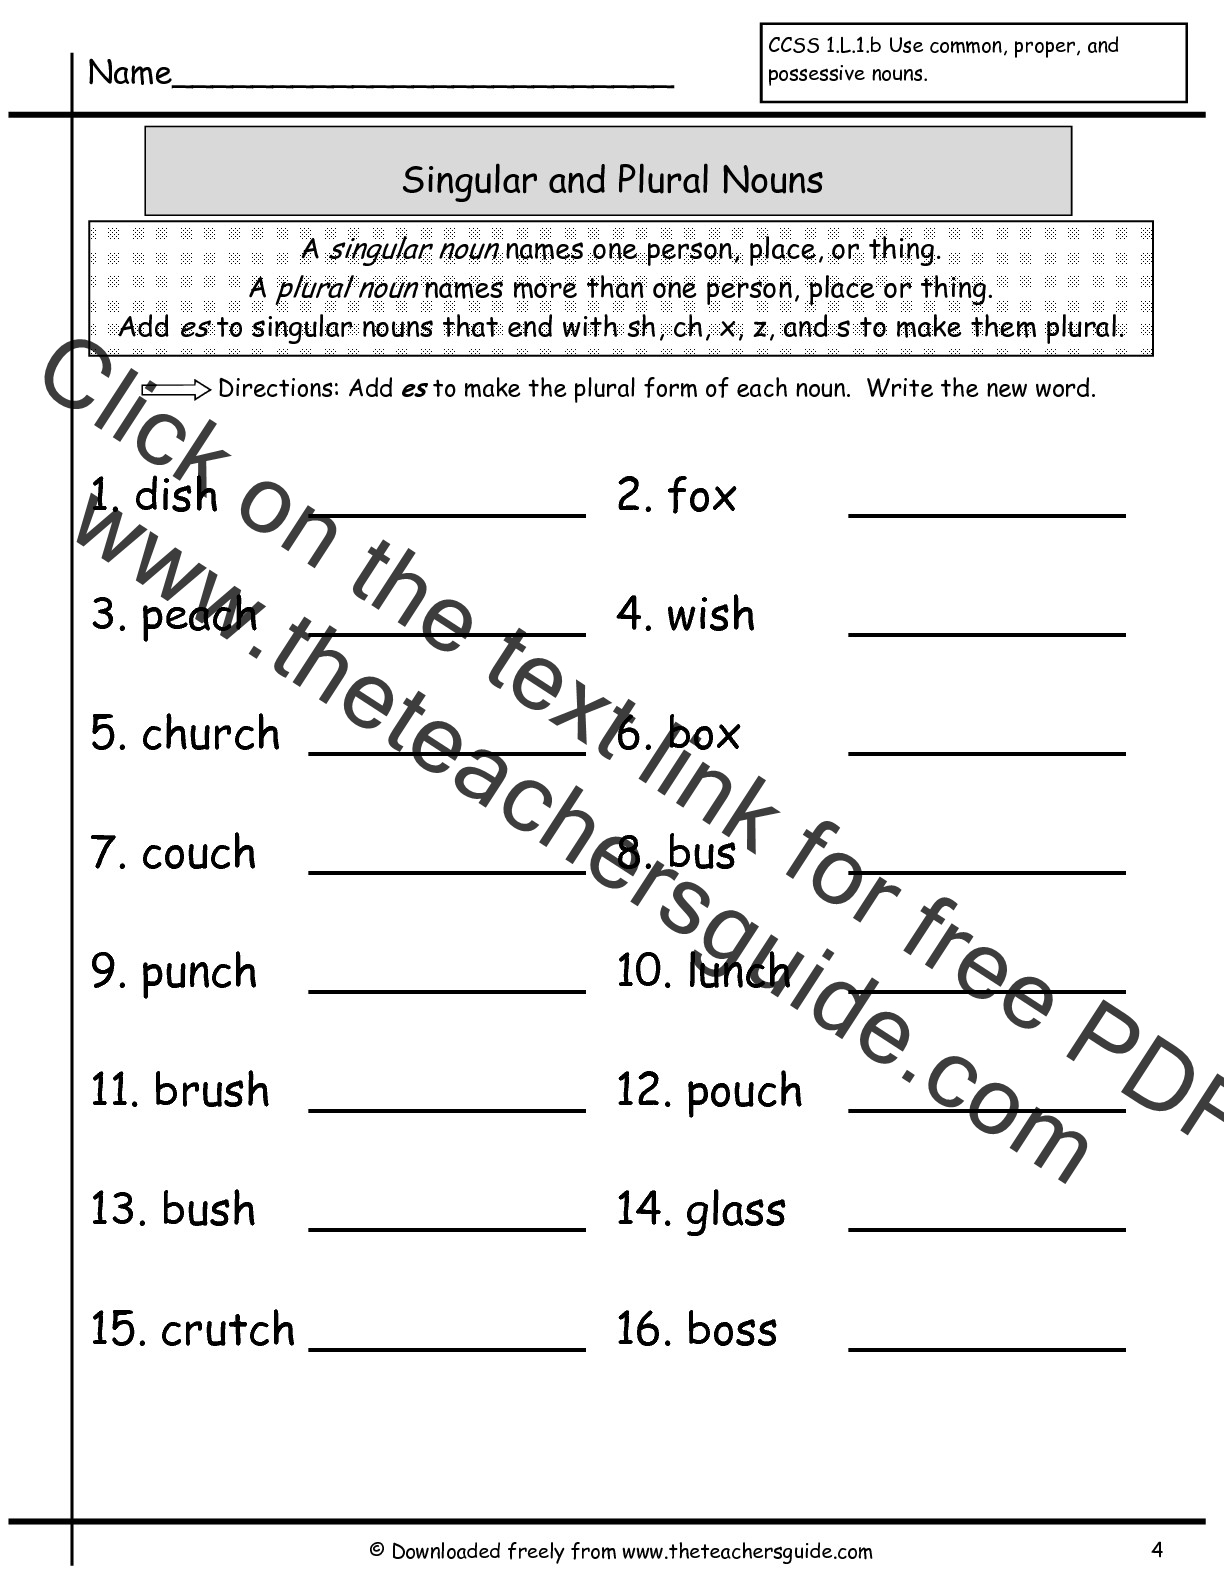 singular-and-plural-worksheets-with-answers-for-class-2-eyesfoolthemind